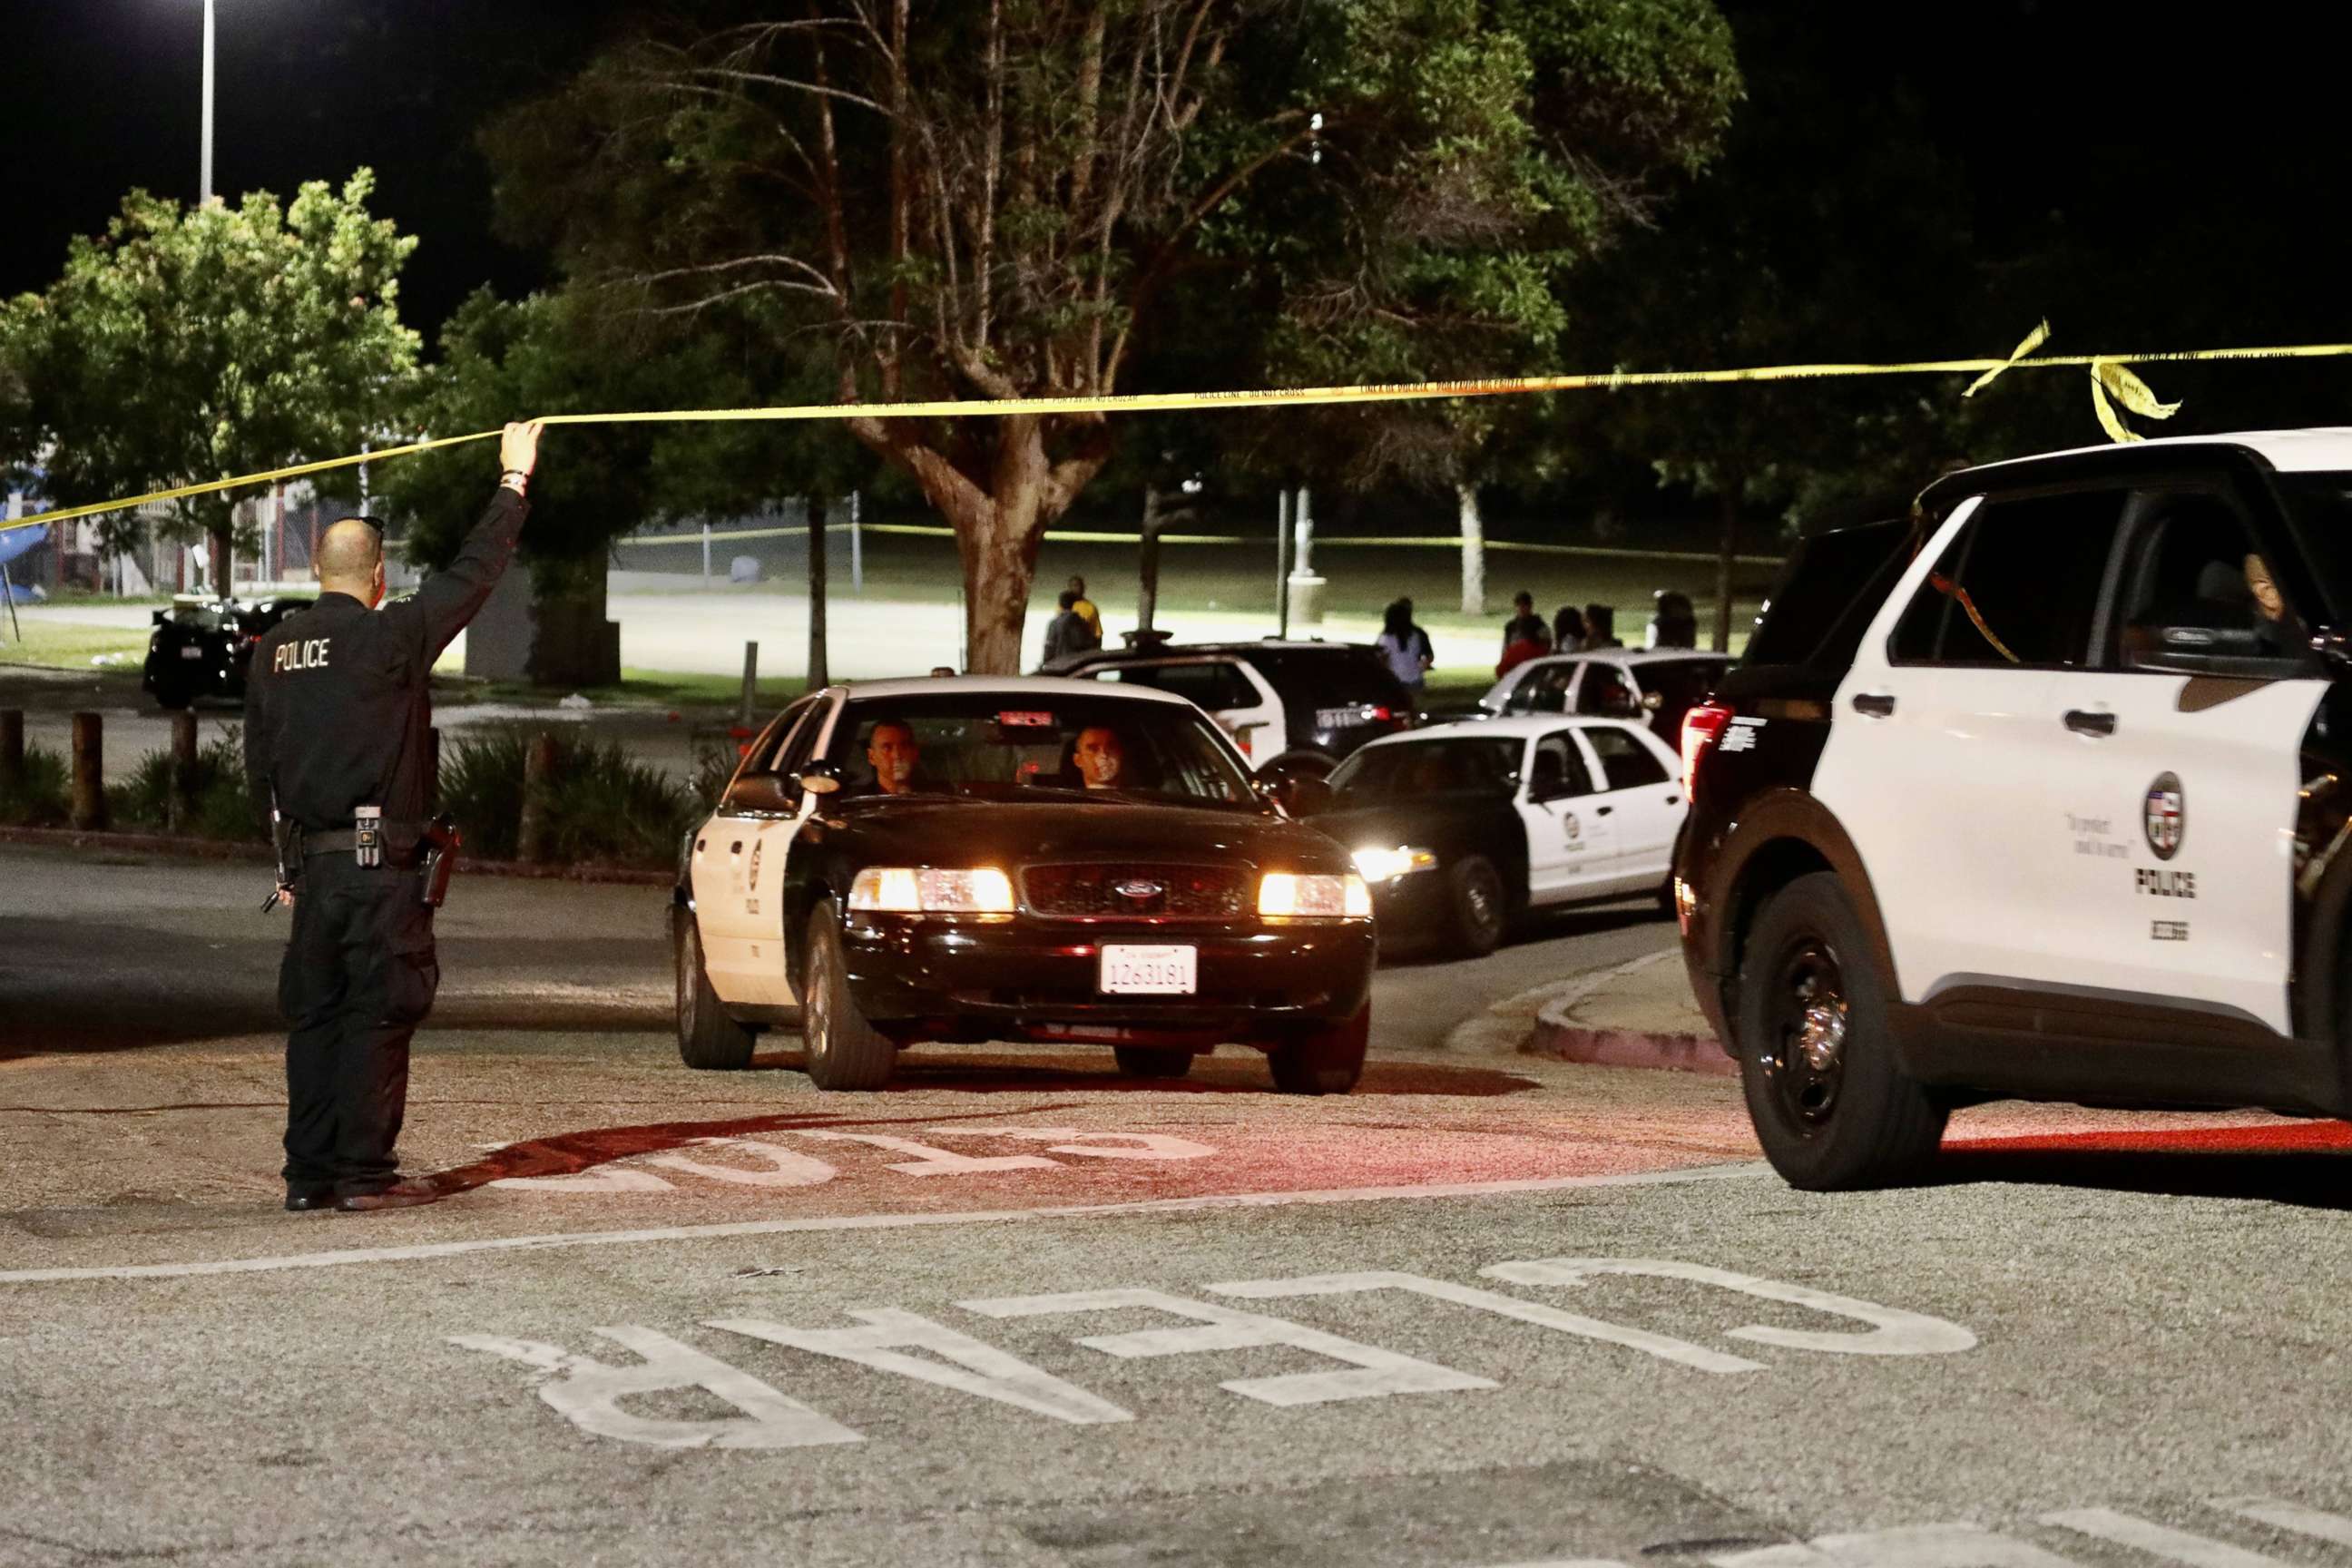 PHOTO: Police officers investigate after a shooting at Peck Park, Los Angeles, July 24, 2022.